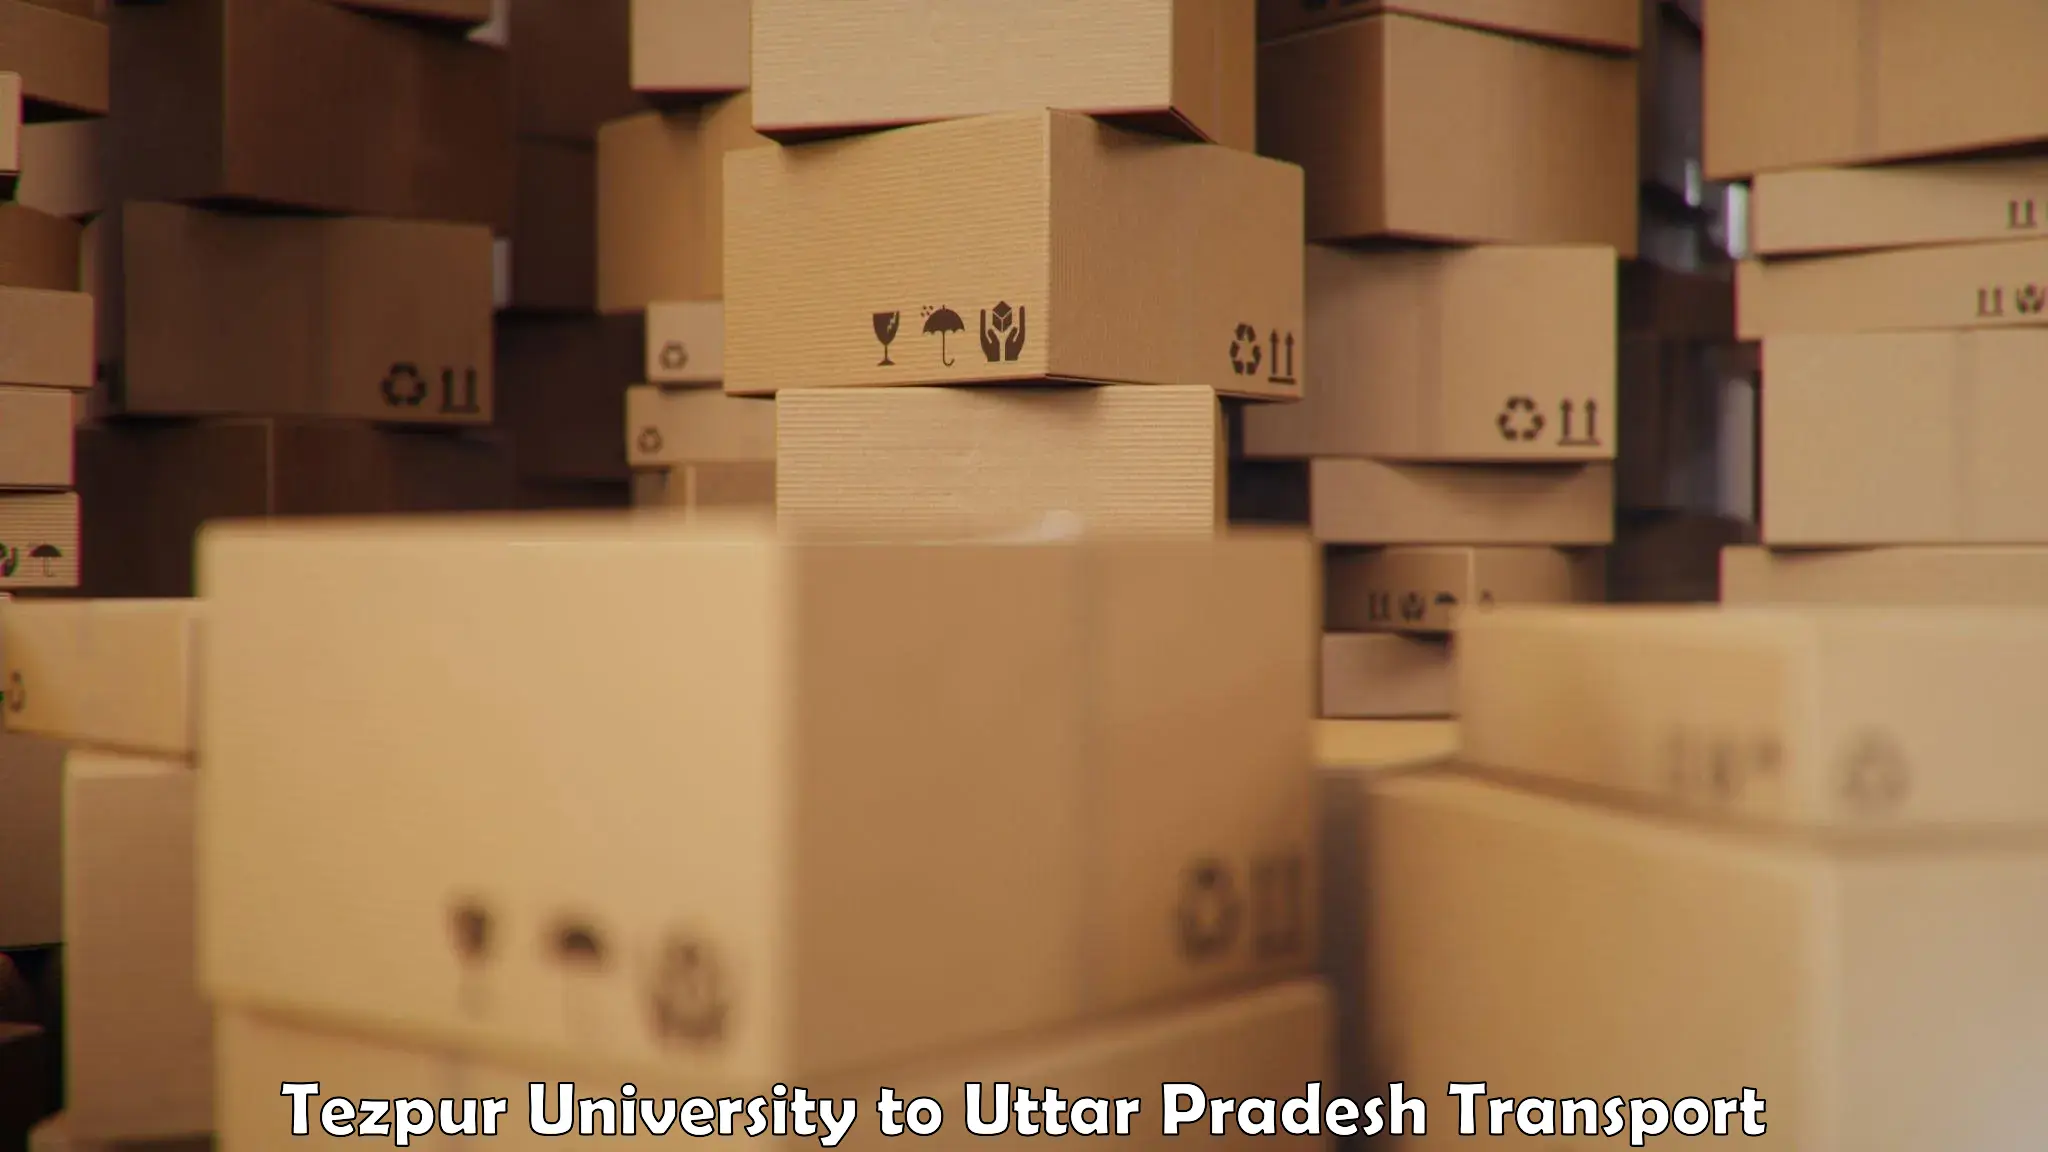 Container transportation services Tezpur University to Sultanpur